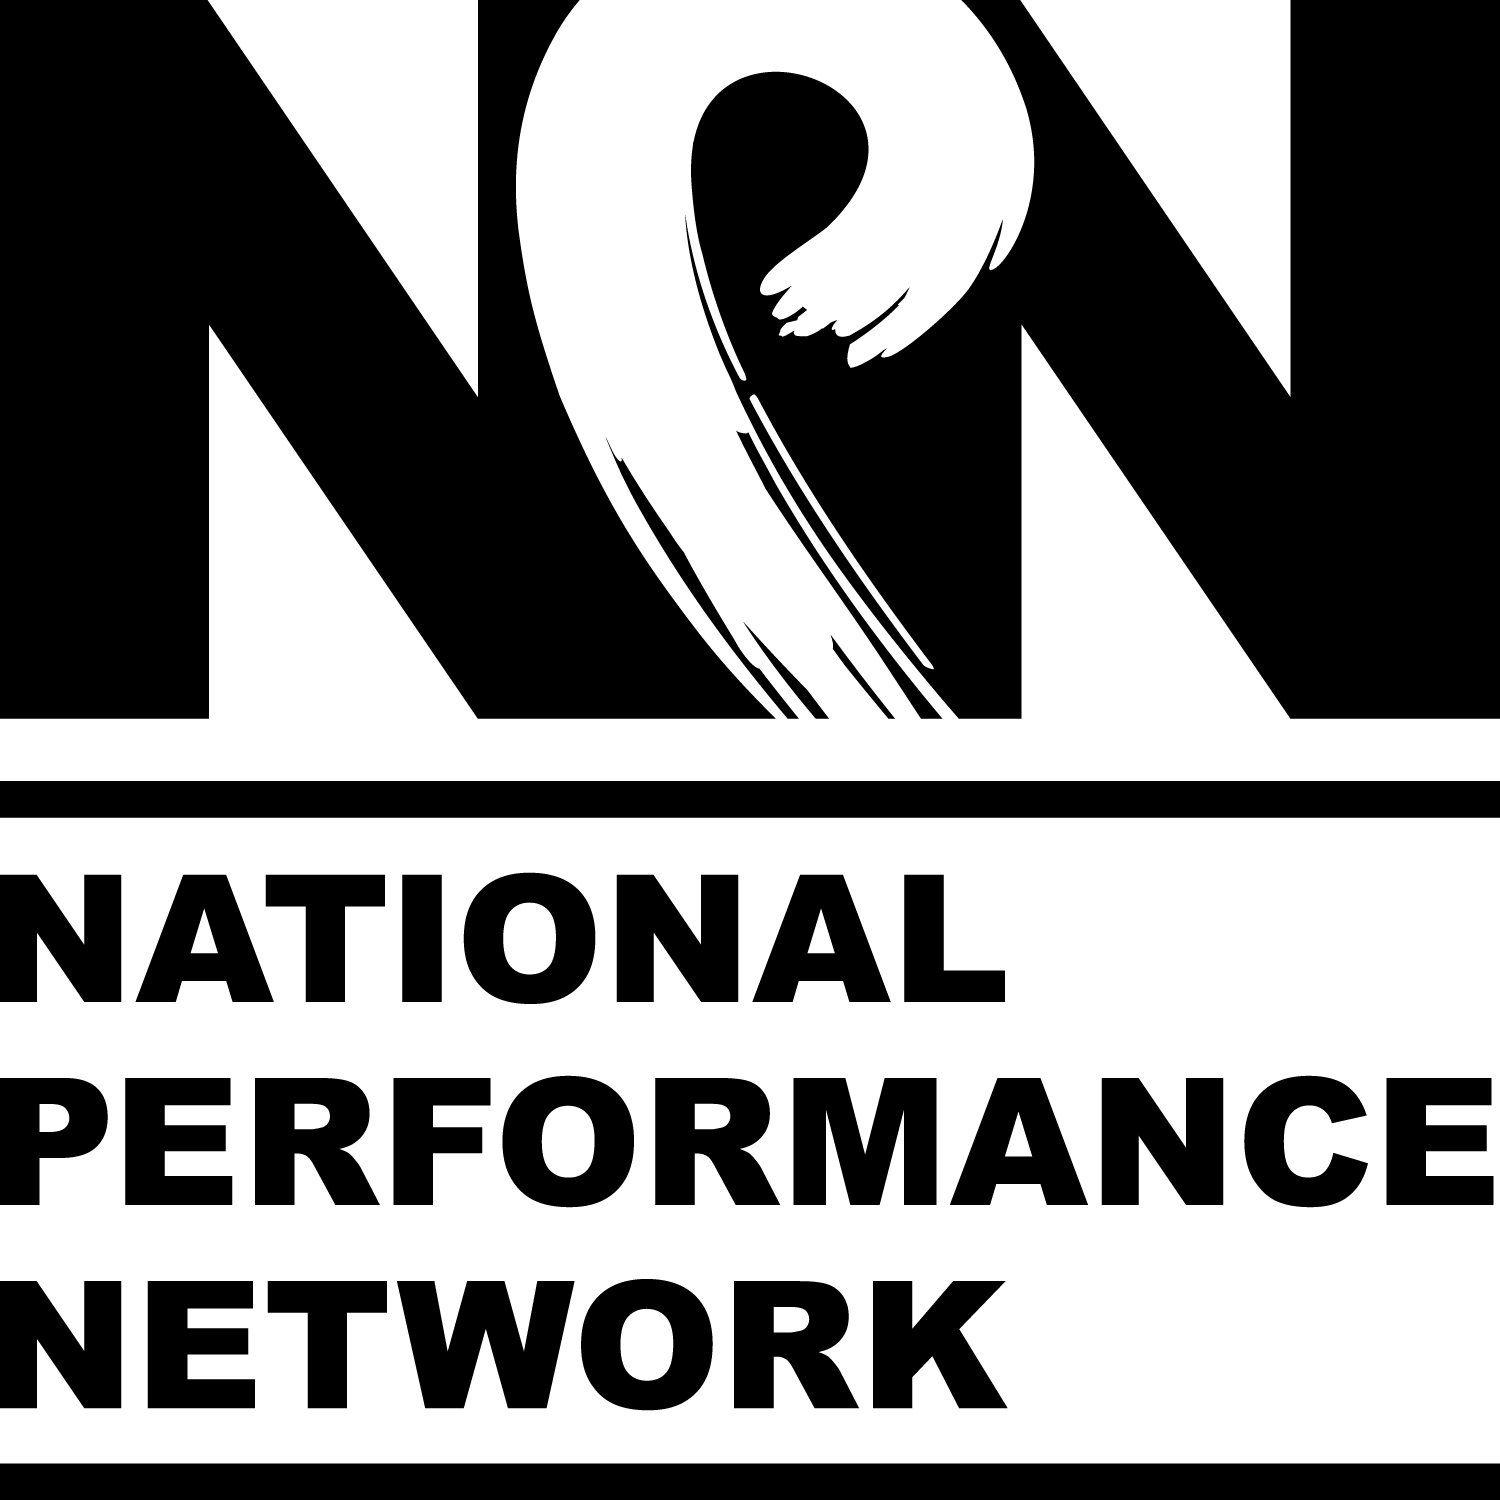 National Performance Network